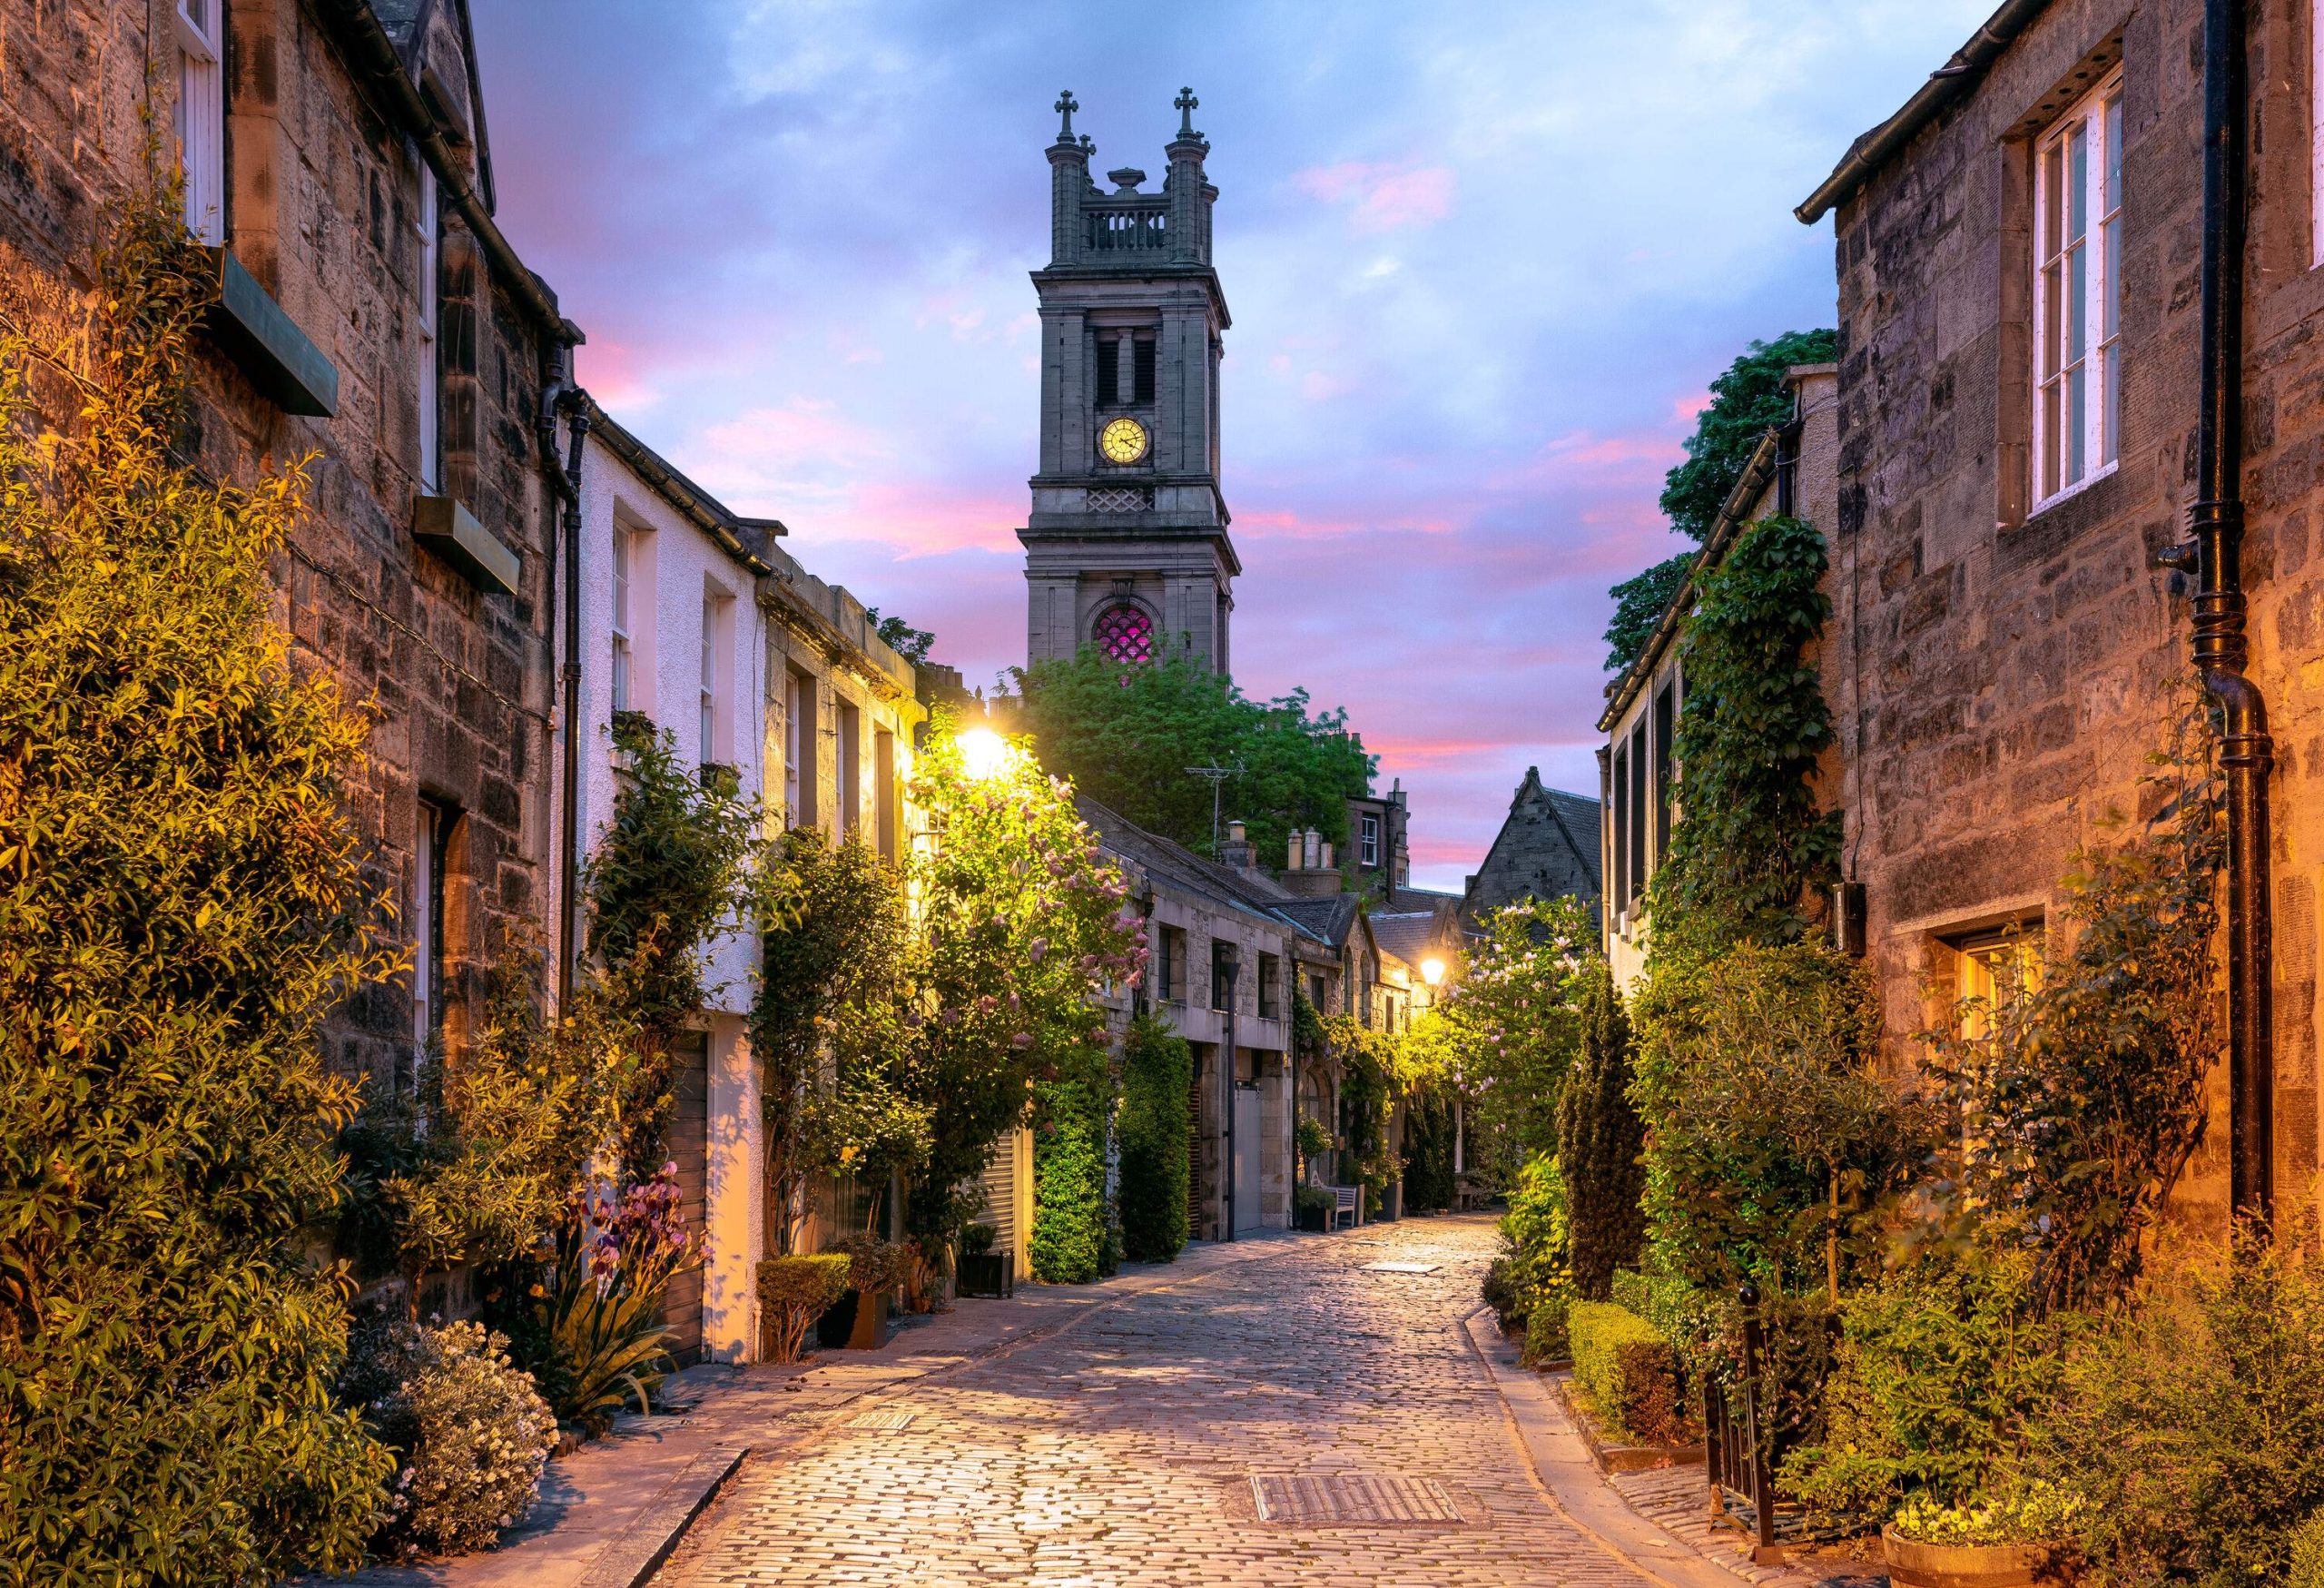 A clock tower looming over a charming cobblestone street lined with plant-covered stone houses.